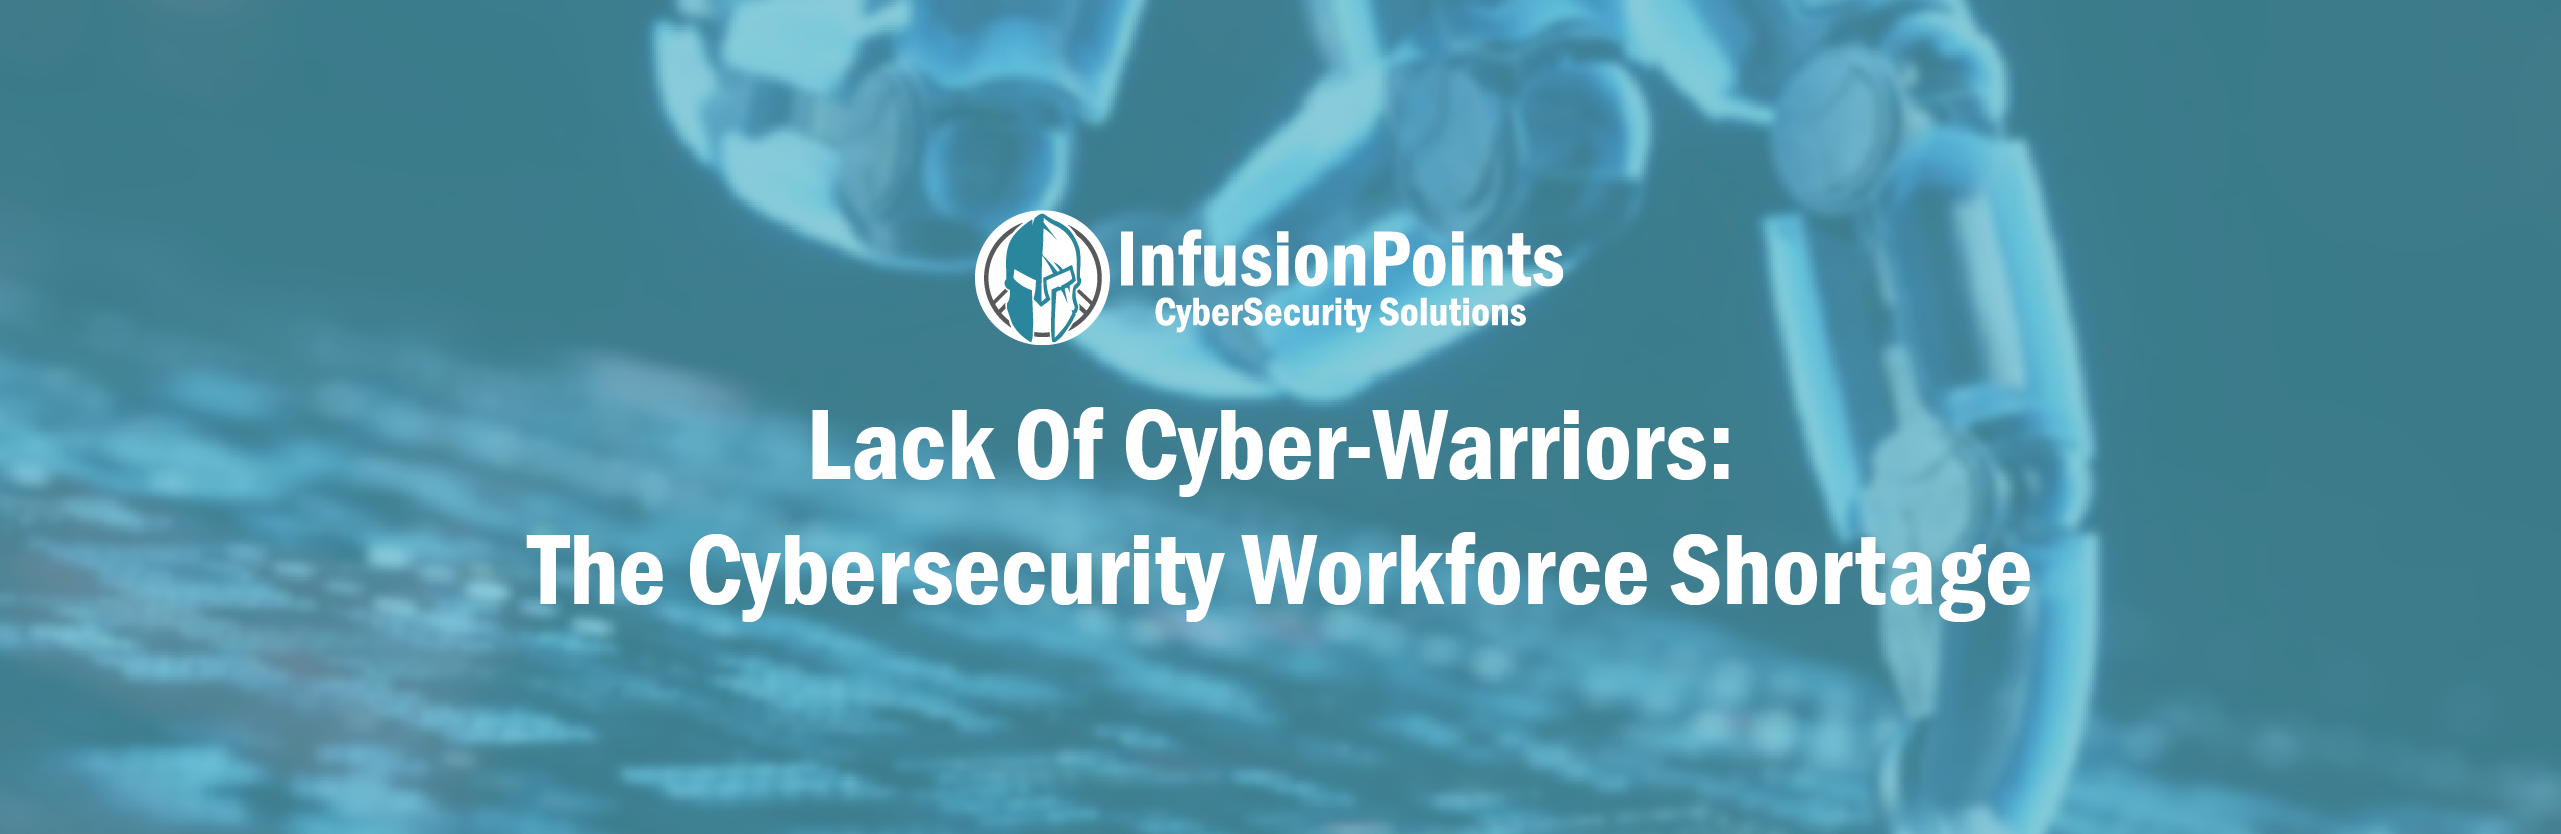 Lack of Cyber-Warriors: The Cybersecurity Workforce Shortage